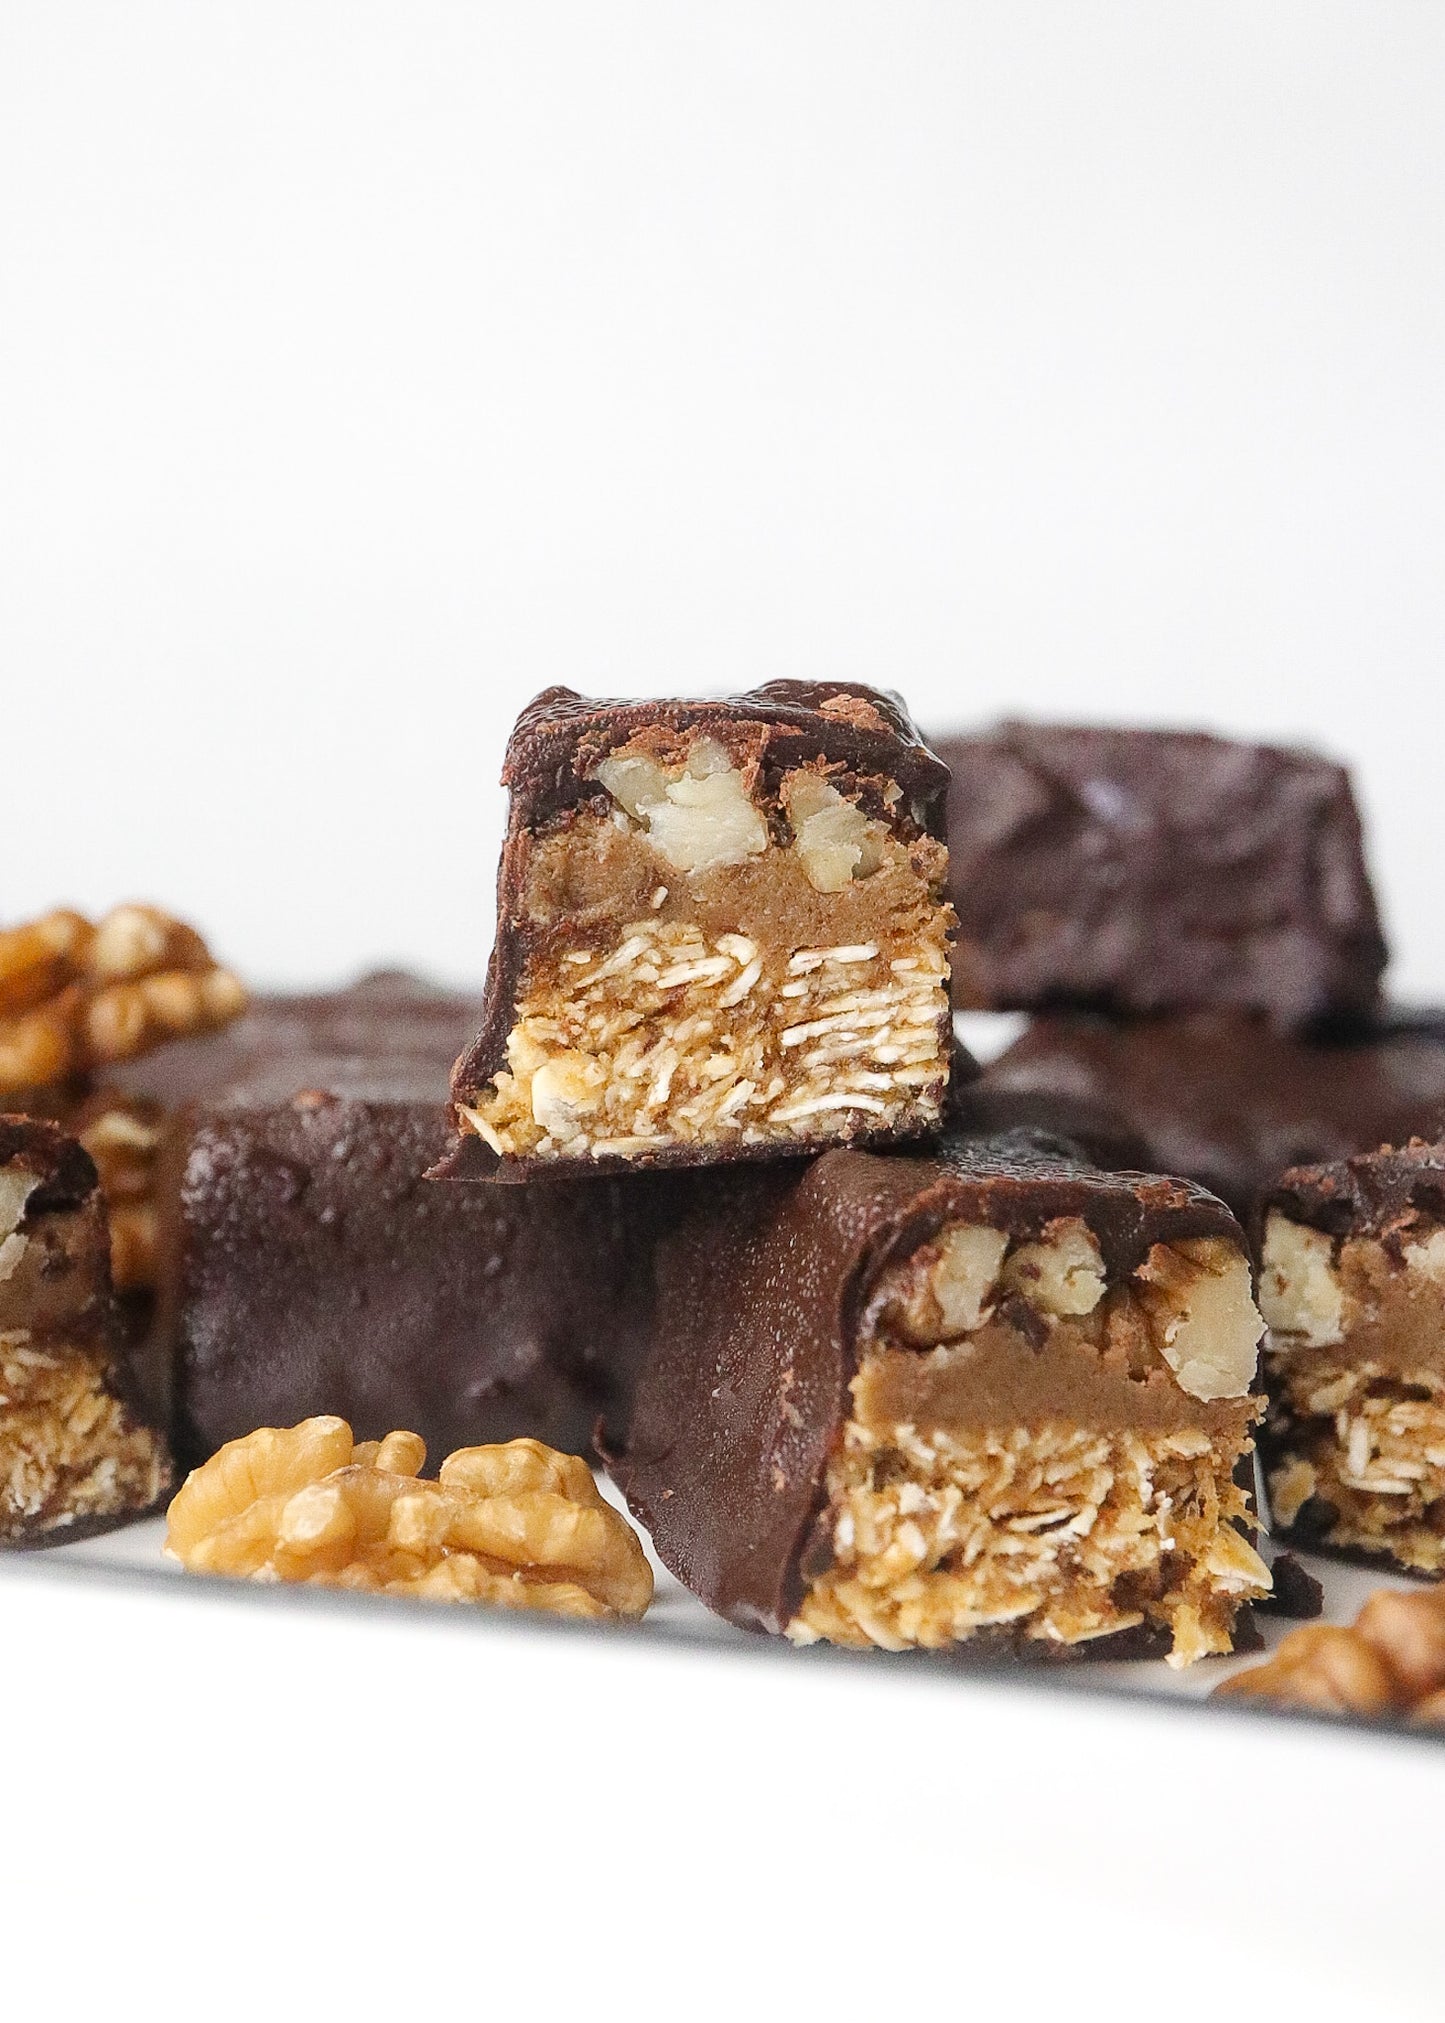 Best Seller: Walnut Chocolate Protein Bars - 65 grams (5 Pieces)